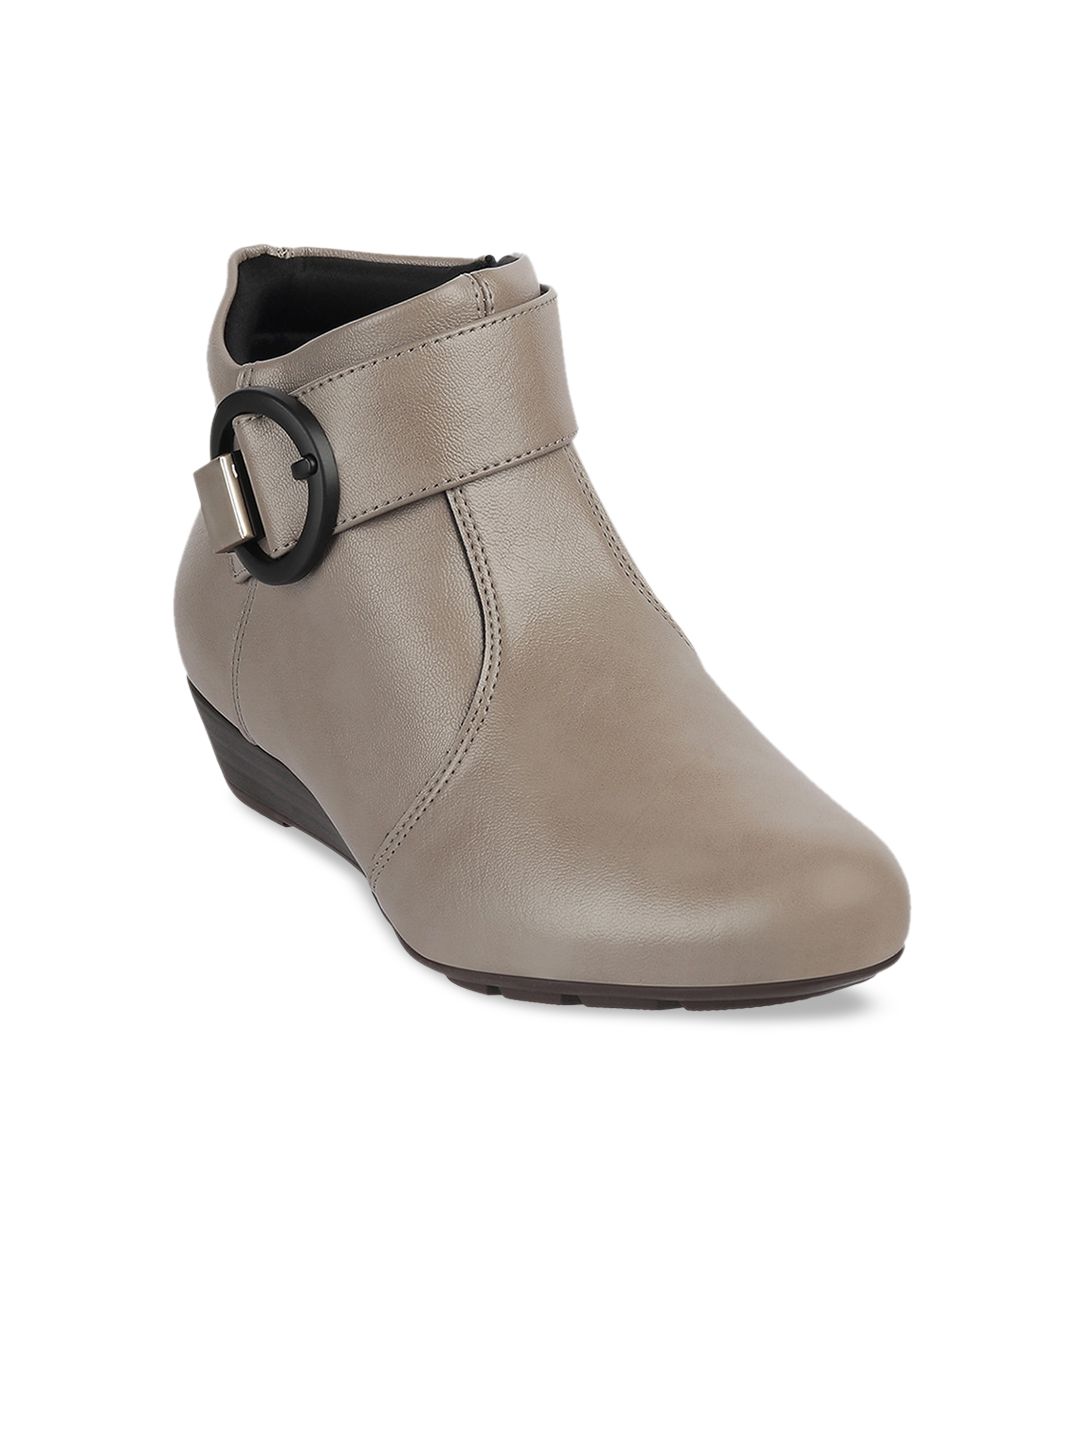 MODARE Grey PU Wedge Heeled Boots with Buckles Price in India